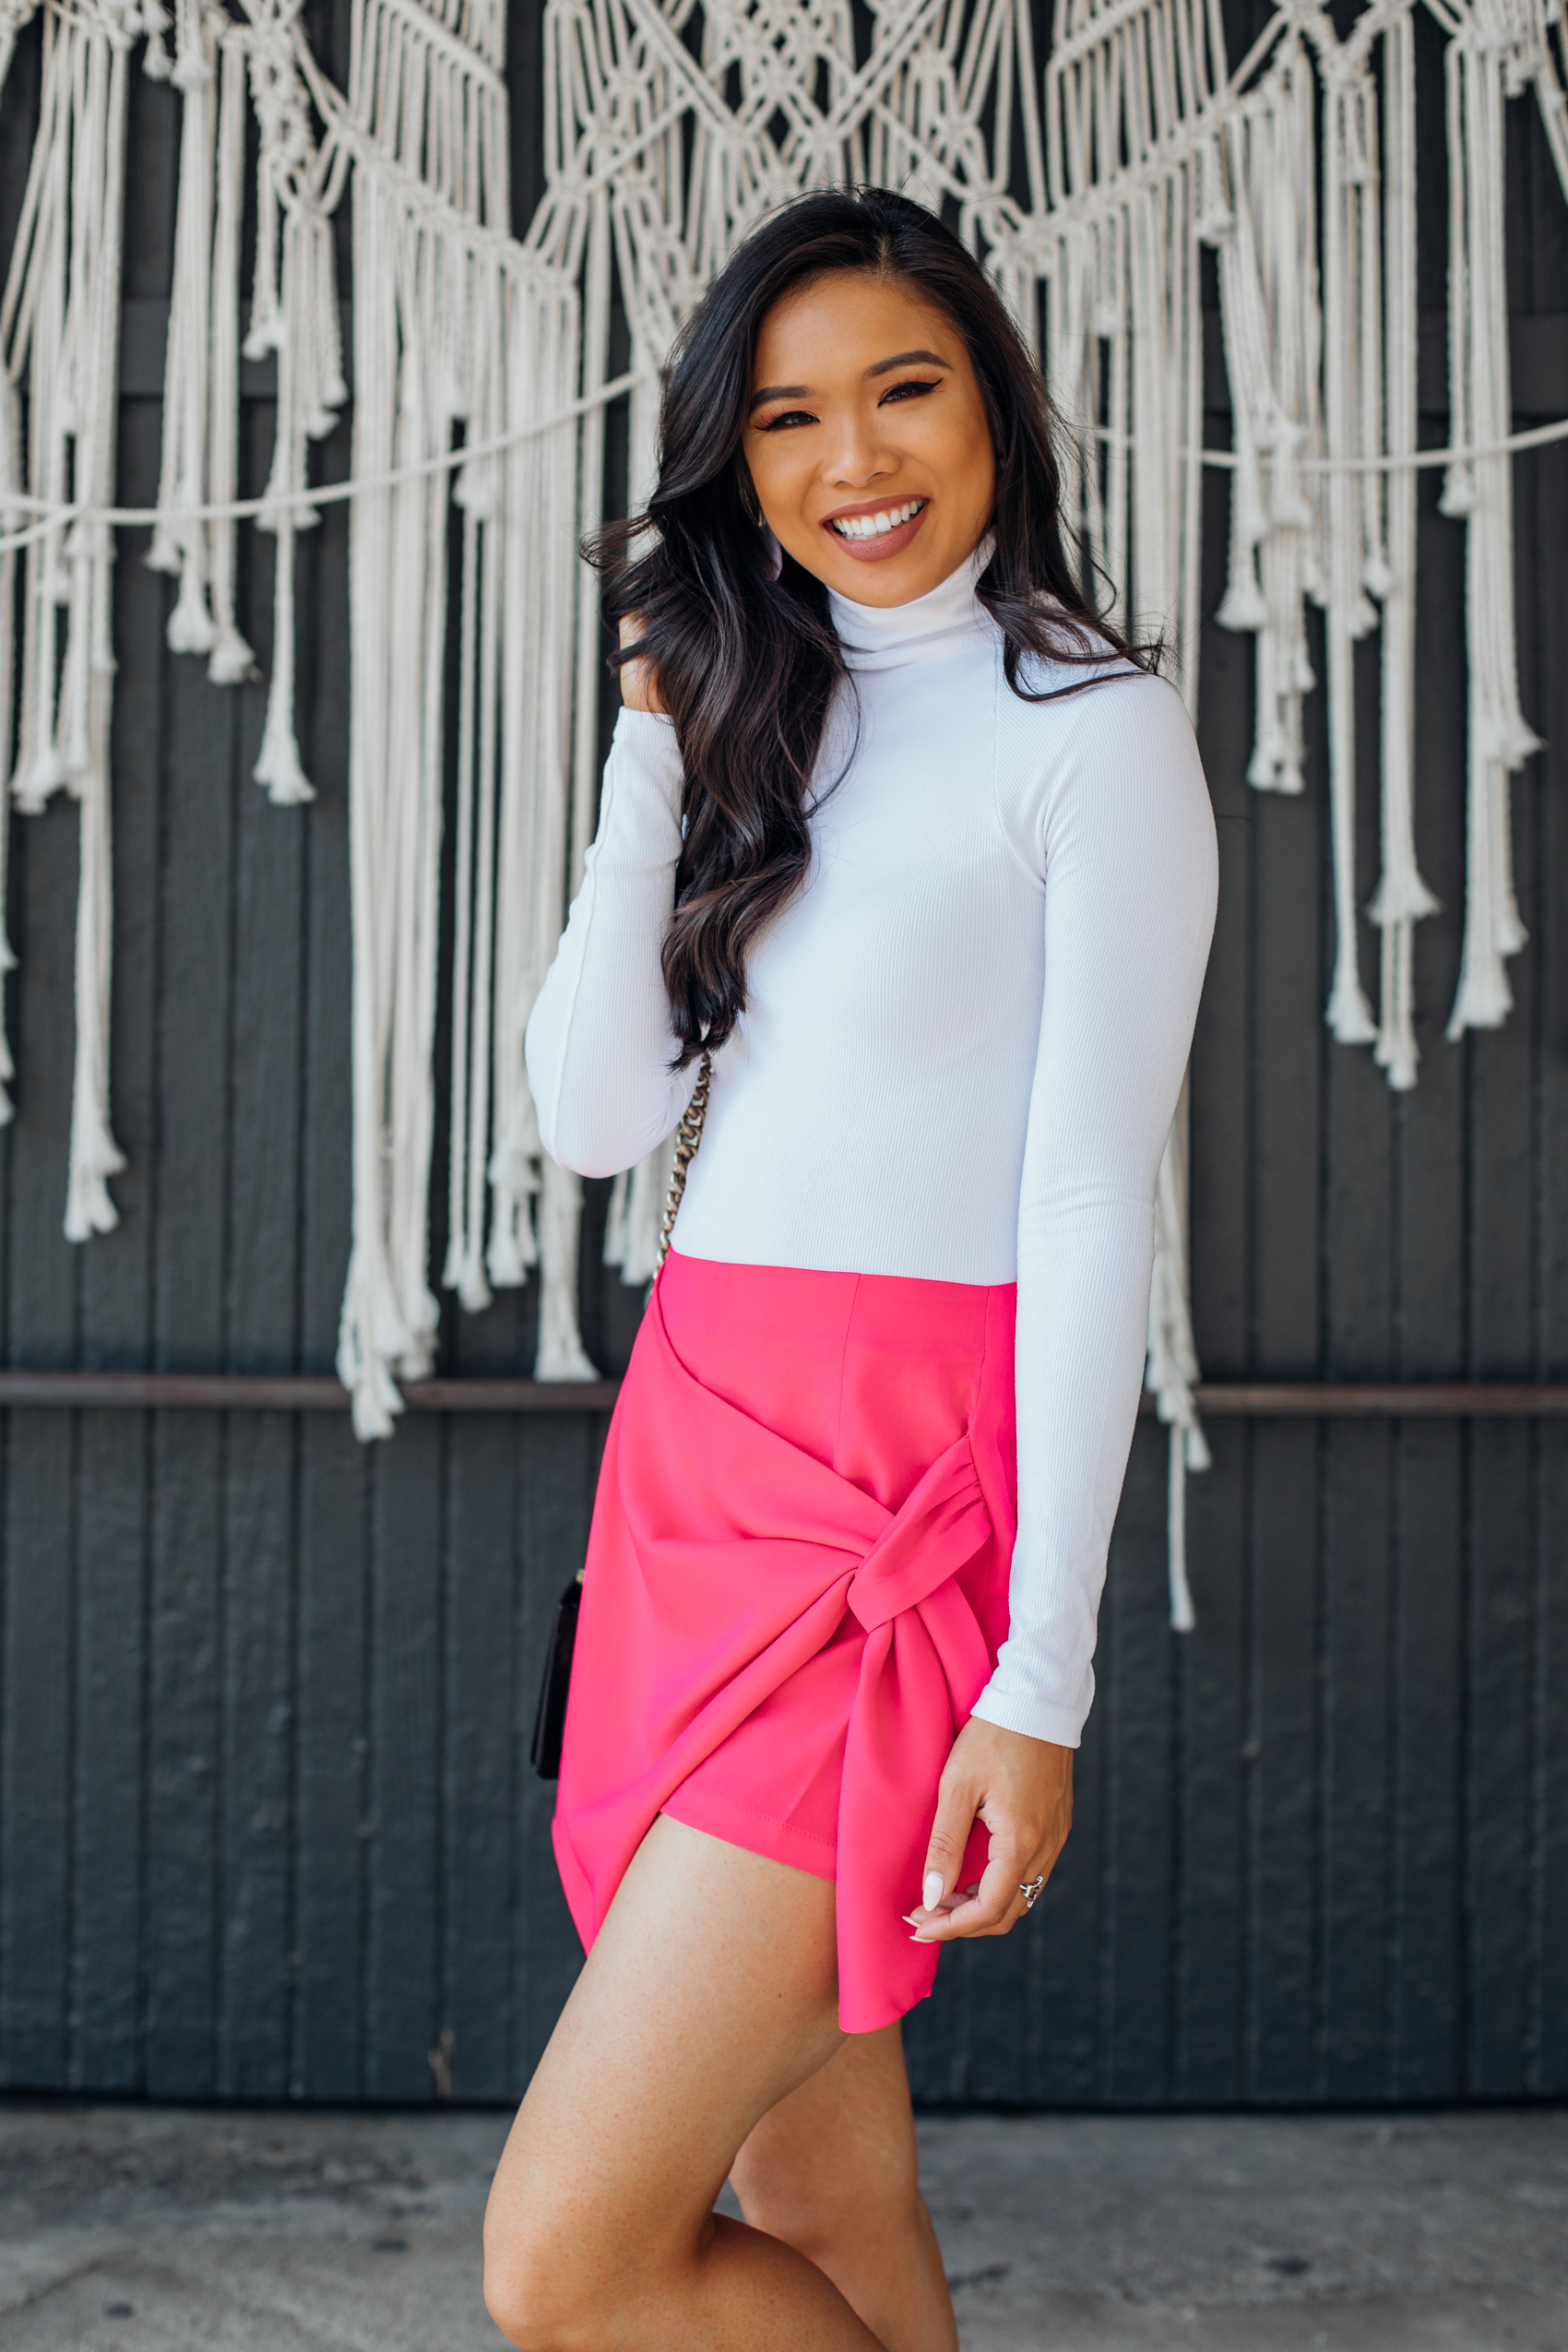 Blogger Hoang-Kim shares a Valentine's Day outfit idea featuring a pink skort